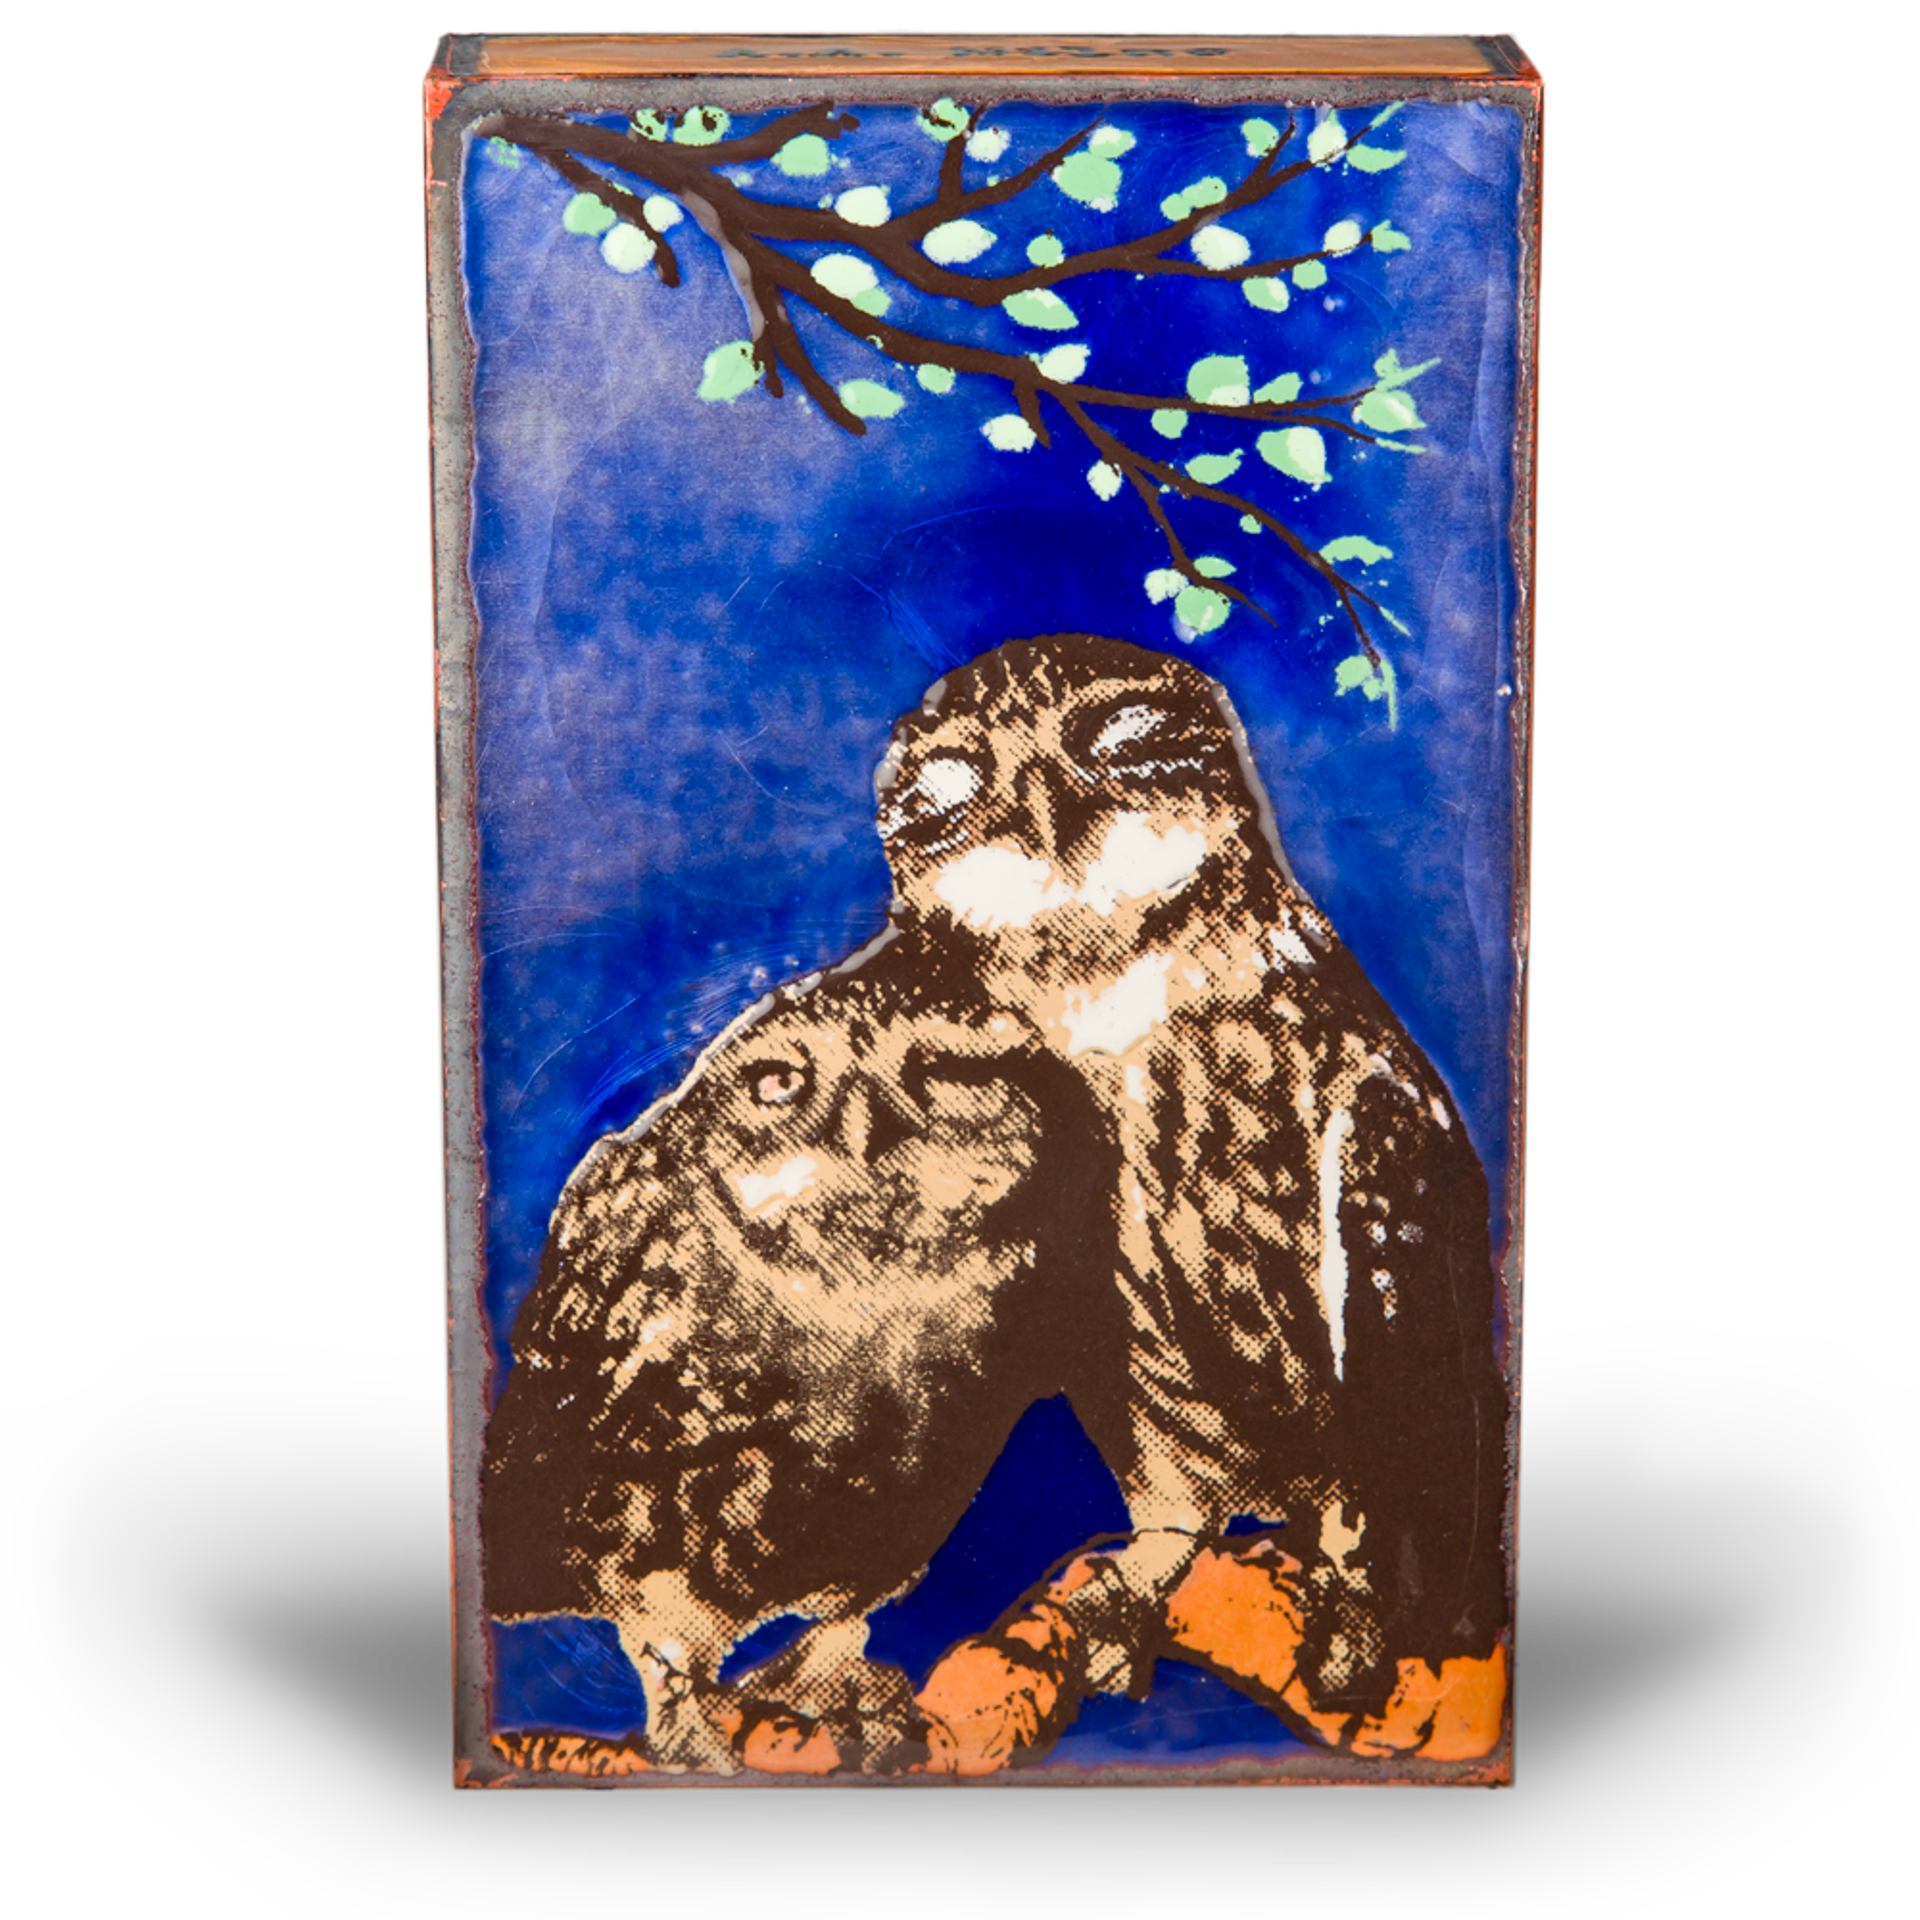 Feathered Friends (Retired Tile) "We have always been and always will be friends. Time can change much, but not that." - A.A. Milne by Houston Llew